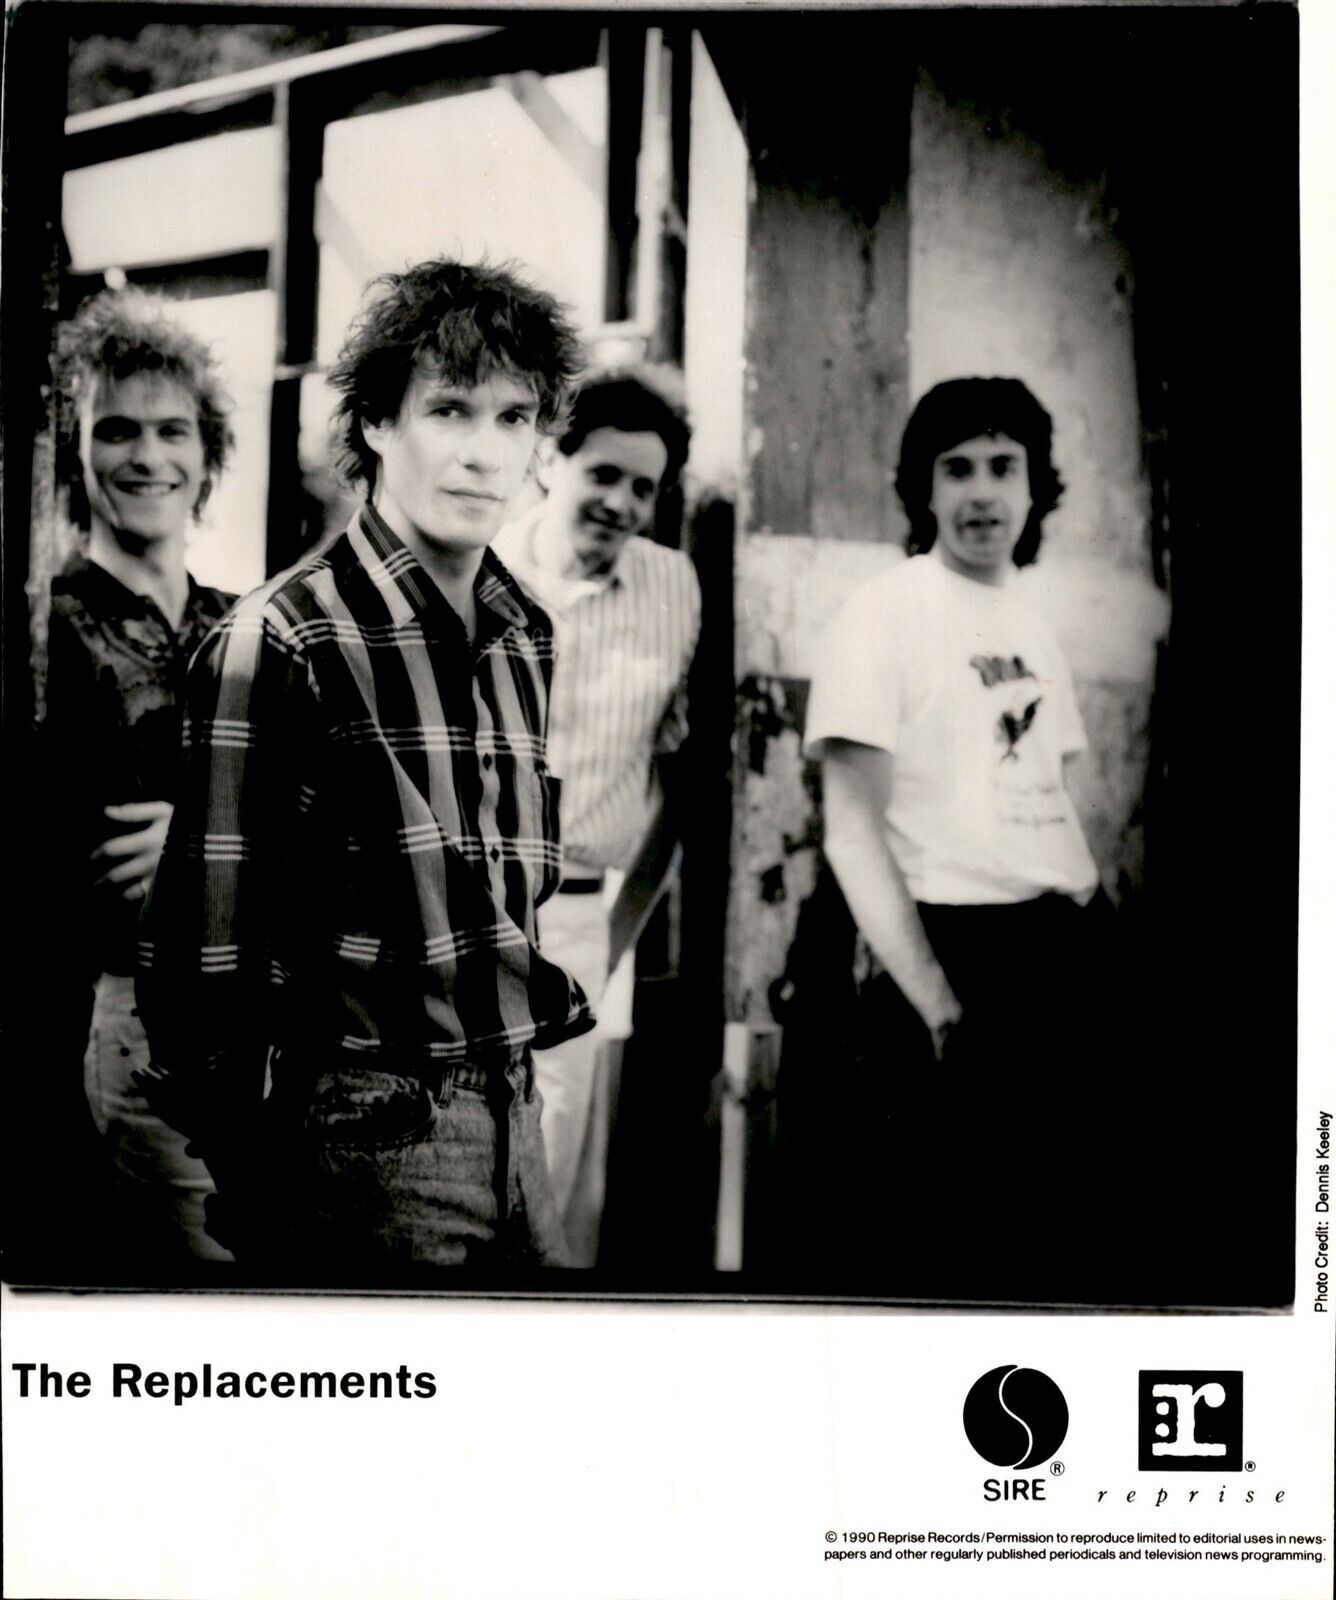 LG936 1990 Original Dennis Keeley Photo THE REPLACEMENTS American Rock Band